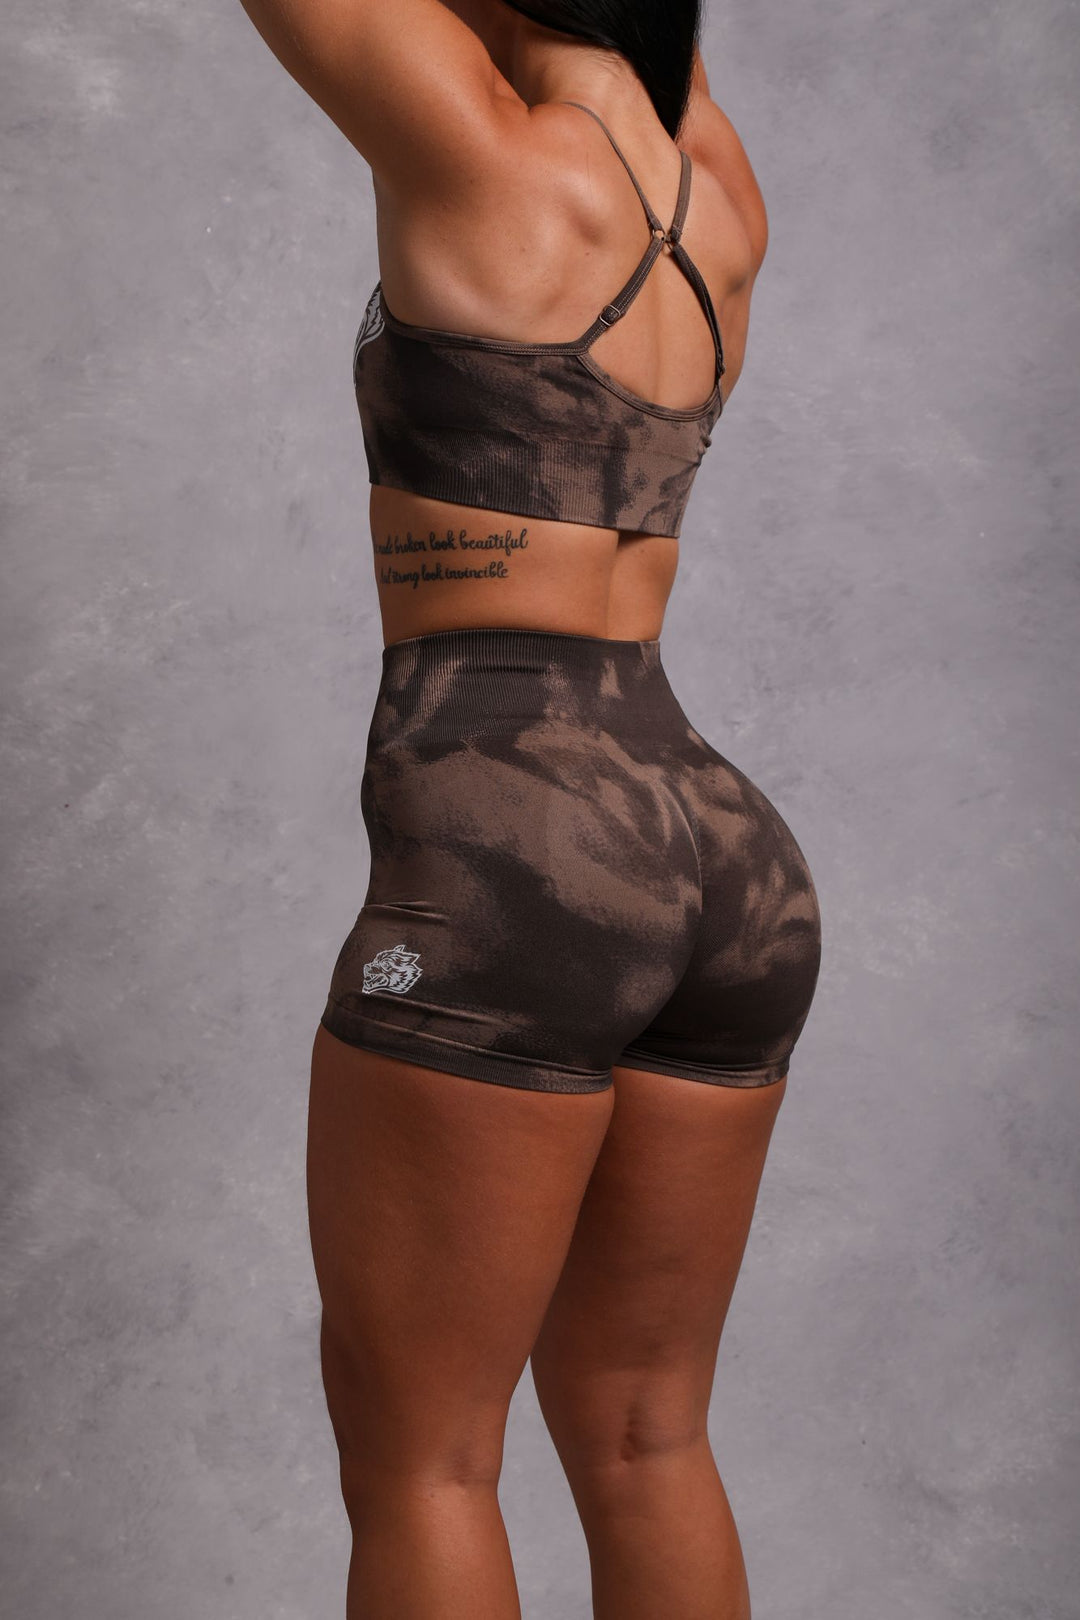 Wolves Forever Seamless Everson "Training" Shorts in Mojave Brown Jumbo Marble